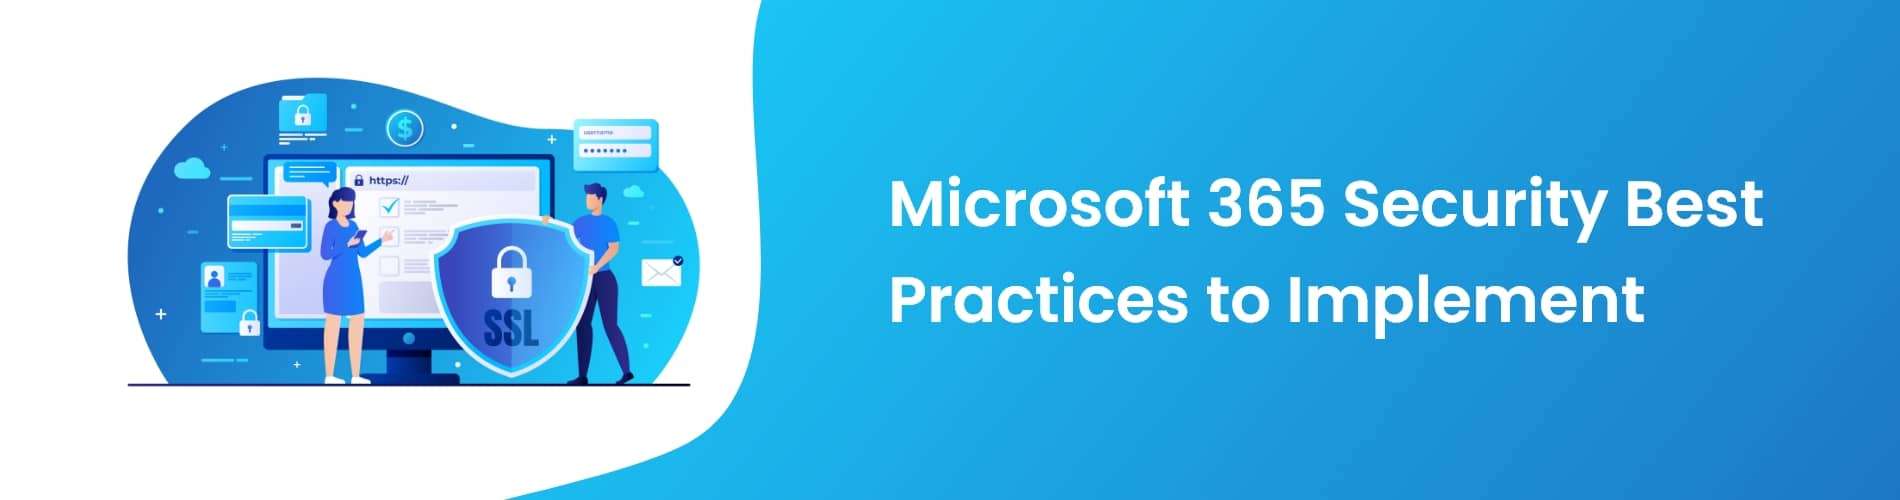 Microsoft Office 365 Security Best Practices | Star Knowledge